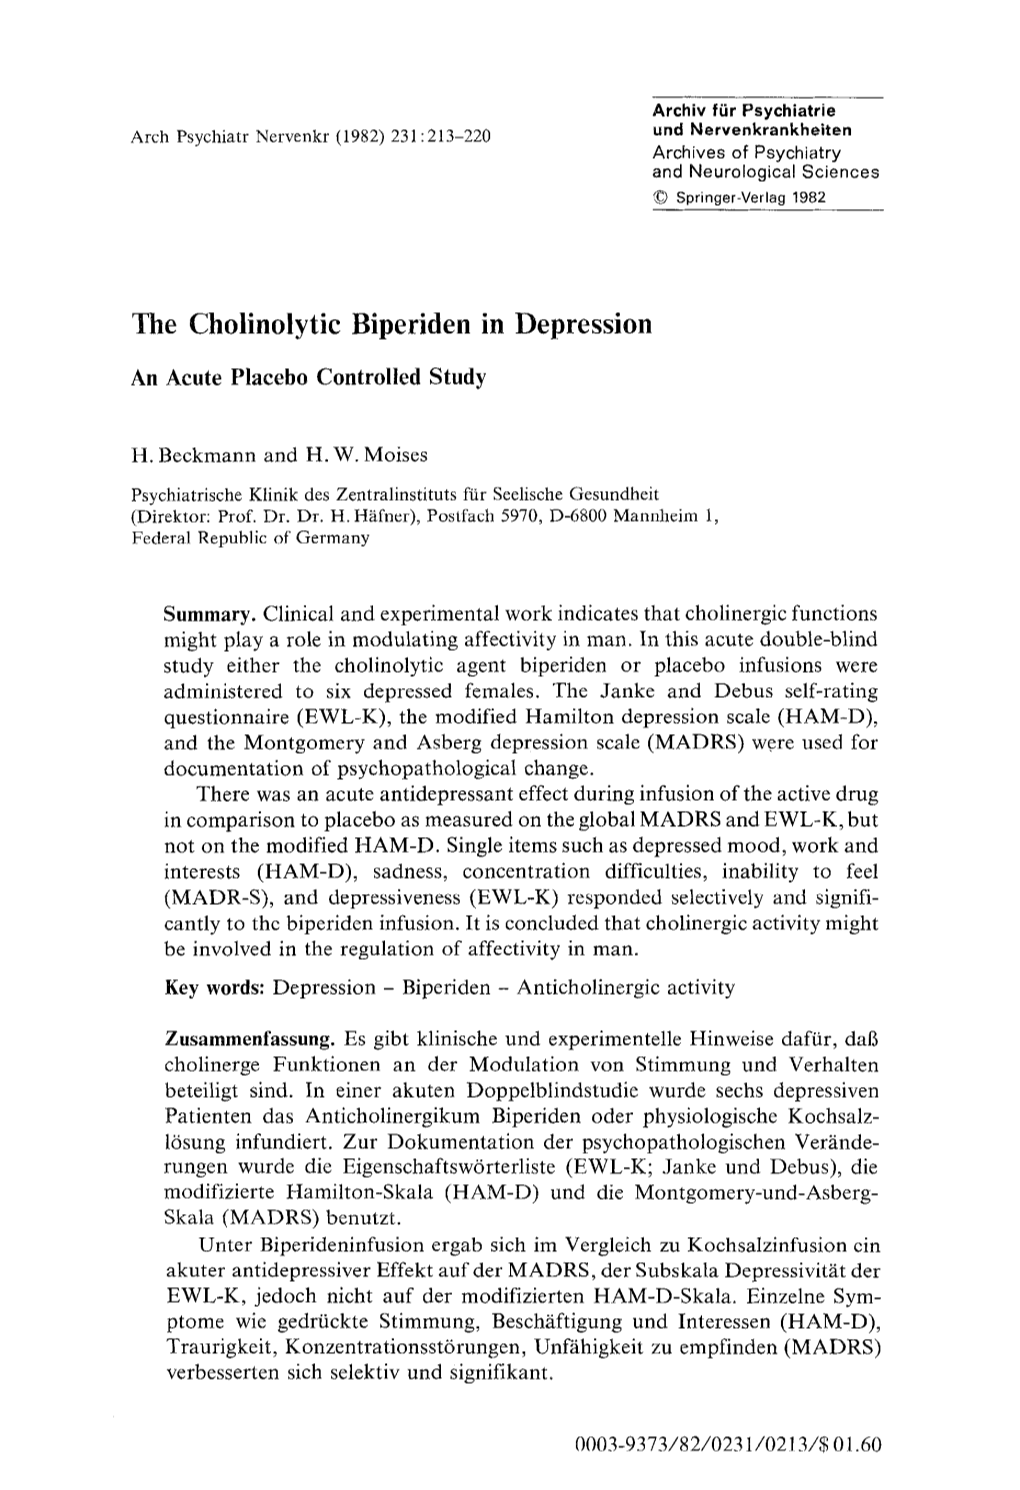 The Cholinolytic Biperiden in Depression 219 Decisive Mechanism, Also Does Not Always Correlate with Clinical Efficacy (Shader and Greenblatt 1972)